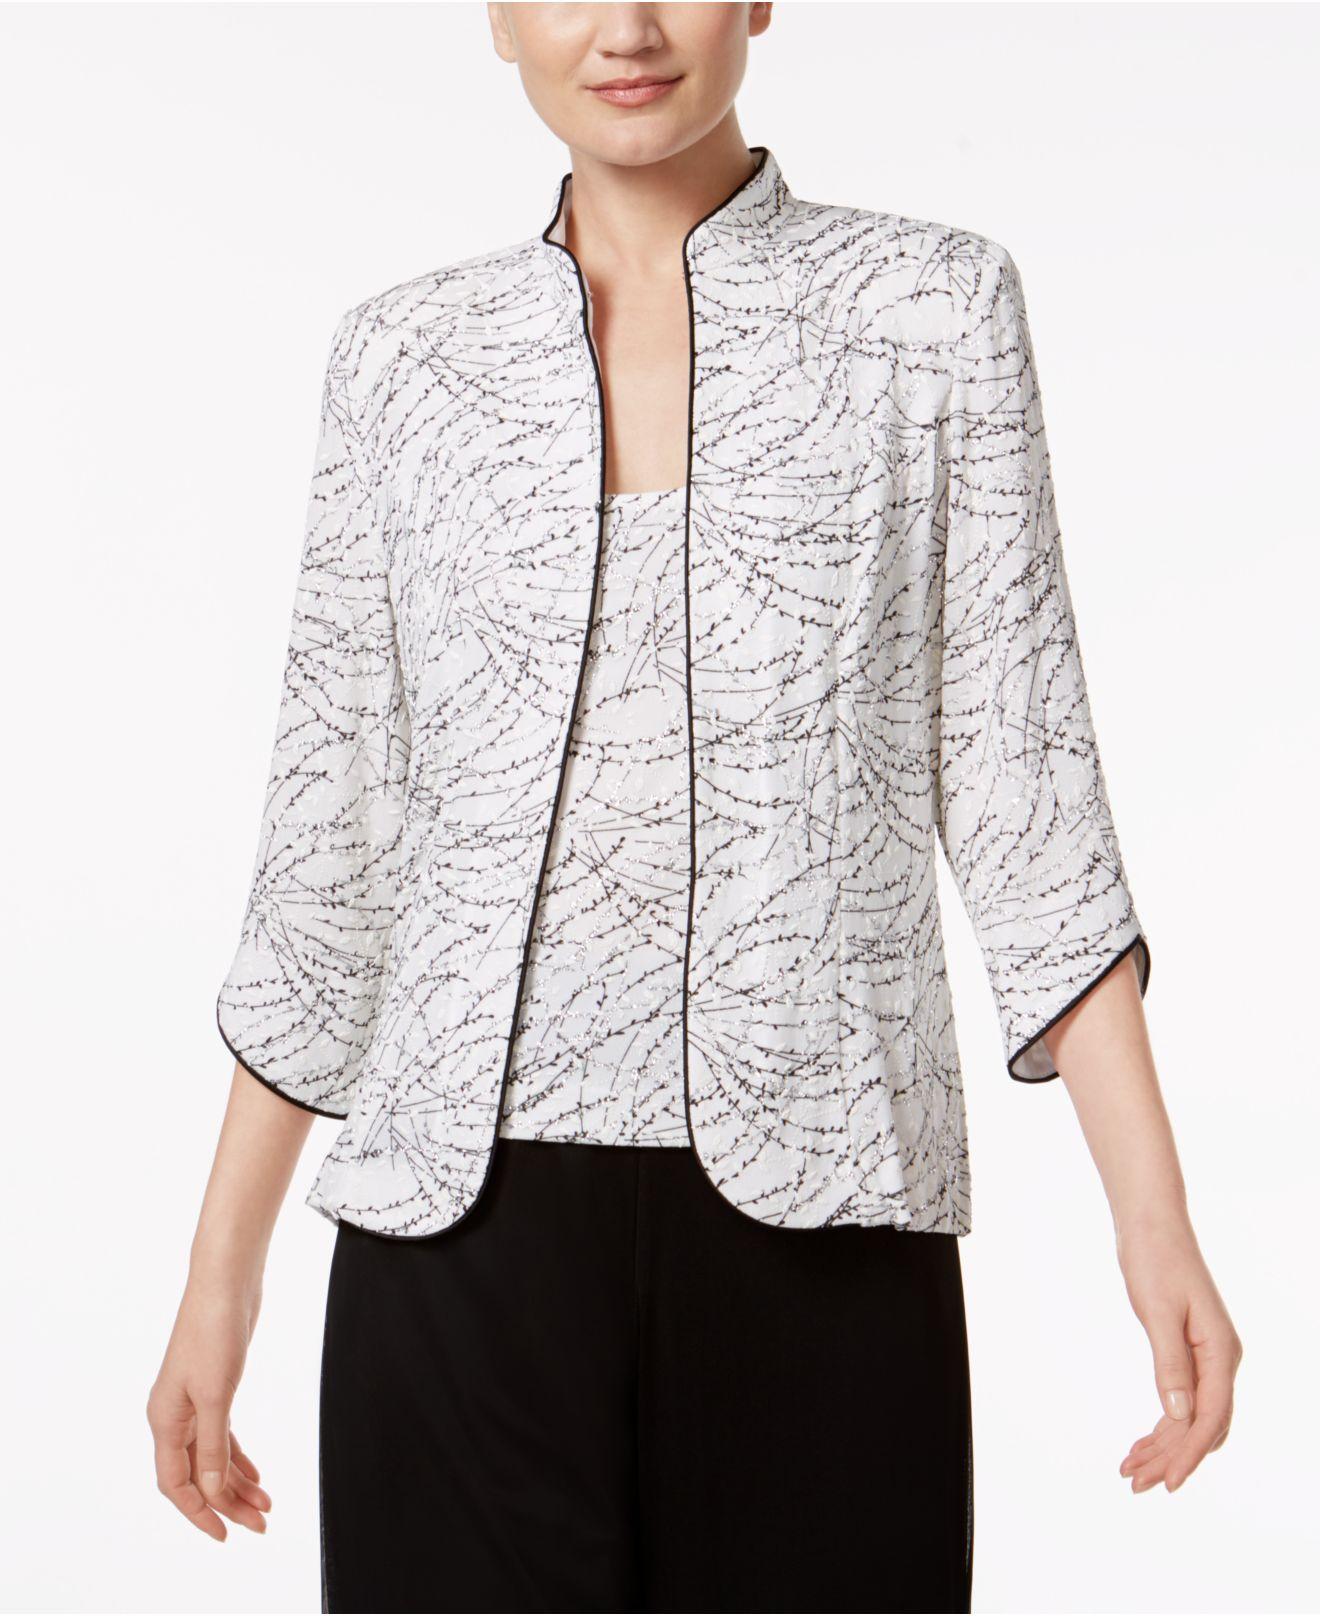 Alex Evenings Satin Printed Jacket And Top Set in White Black (White ...